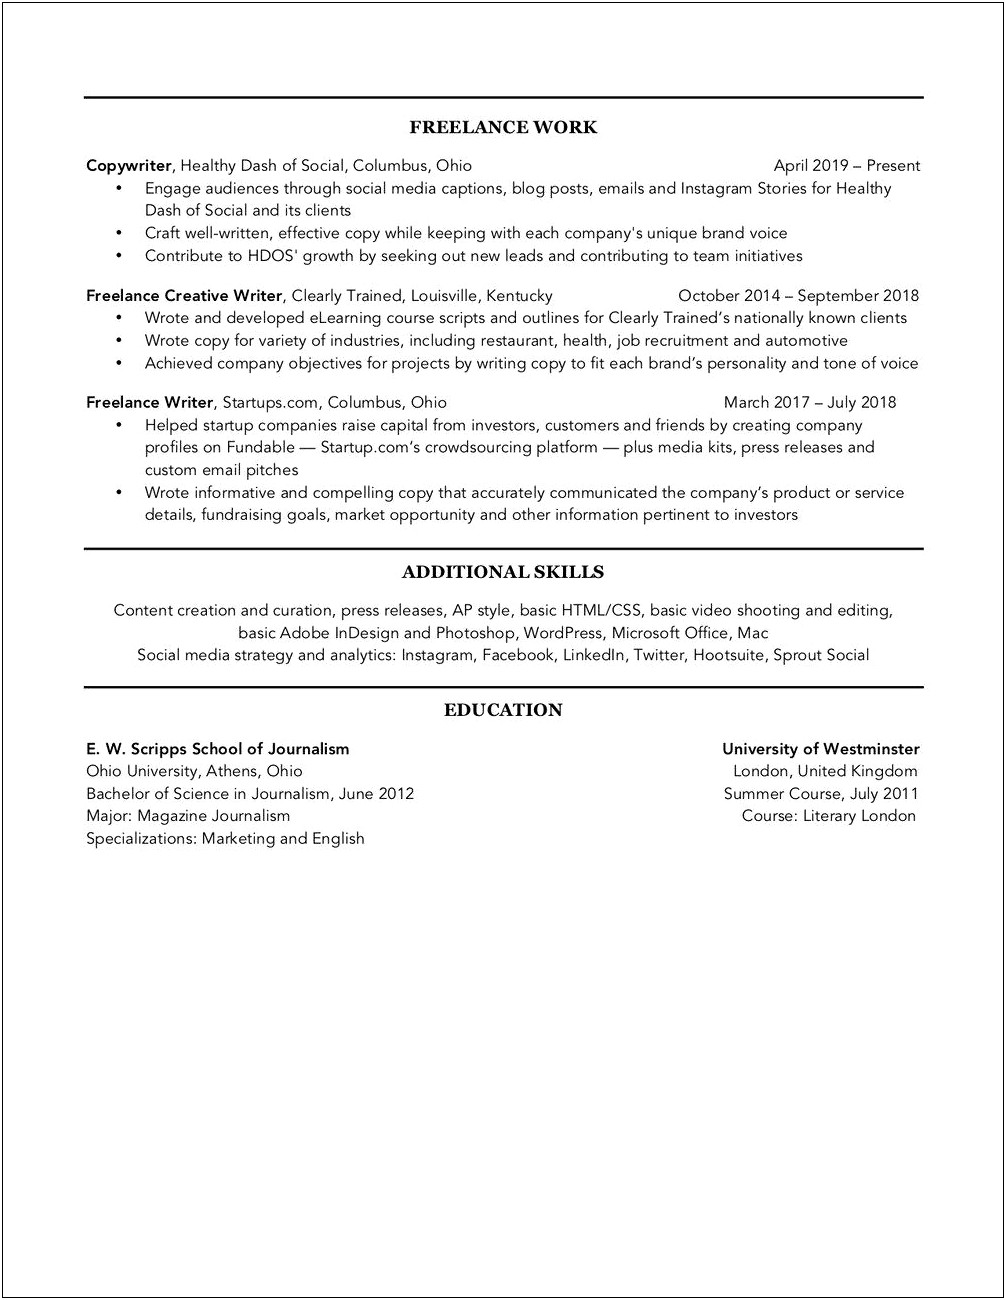 Resume Working For Friend's Startup